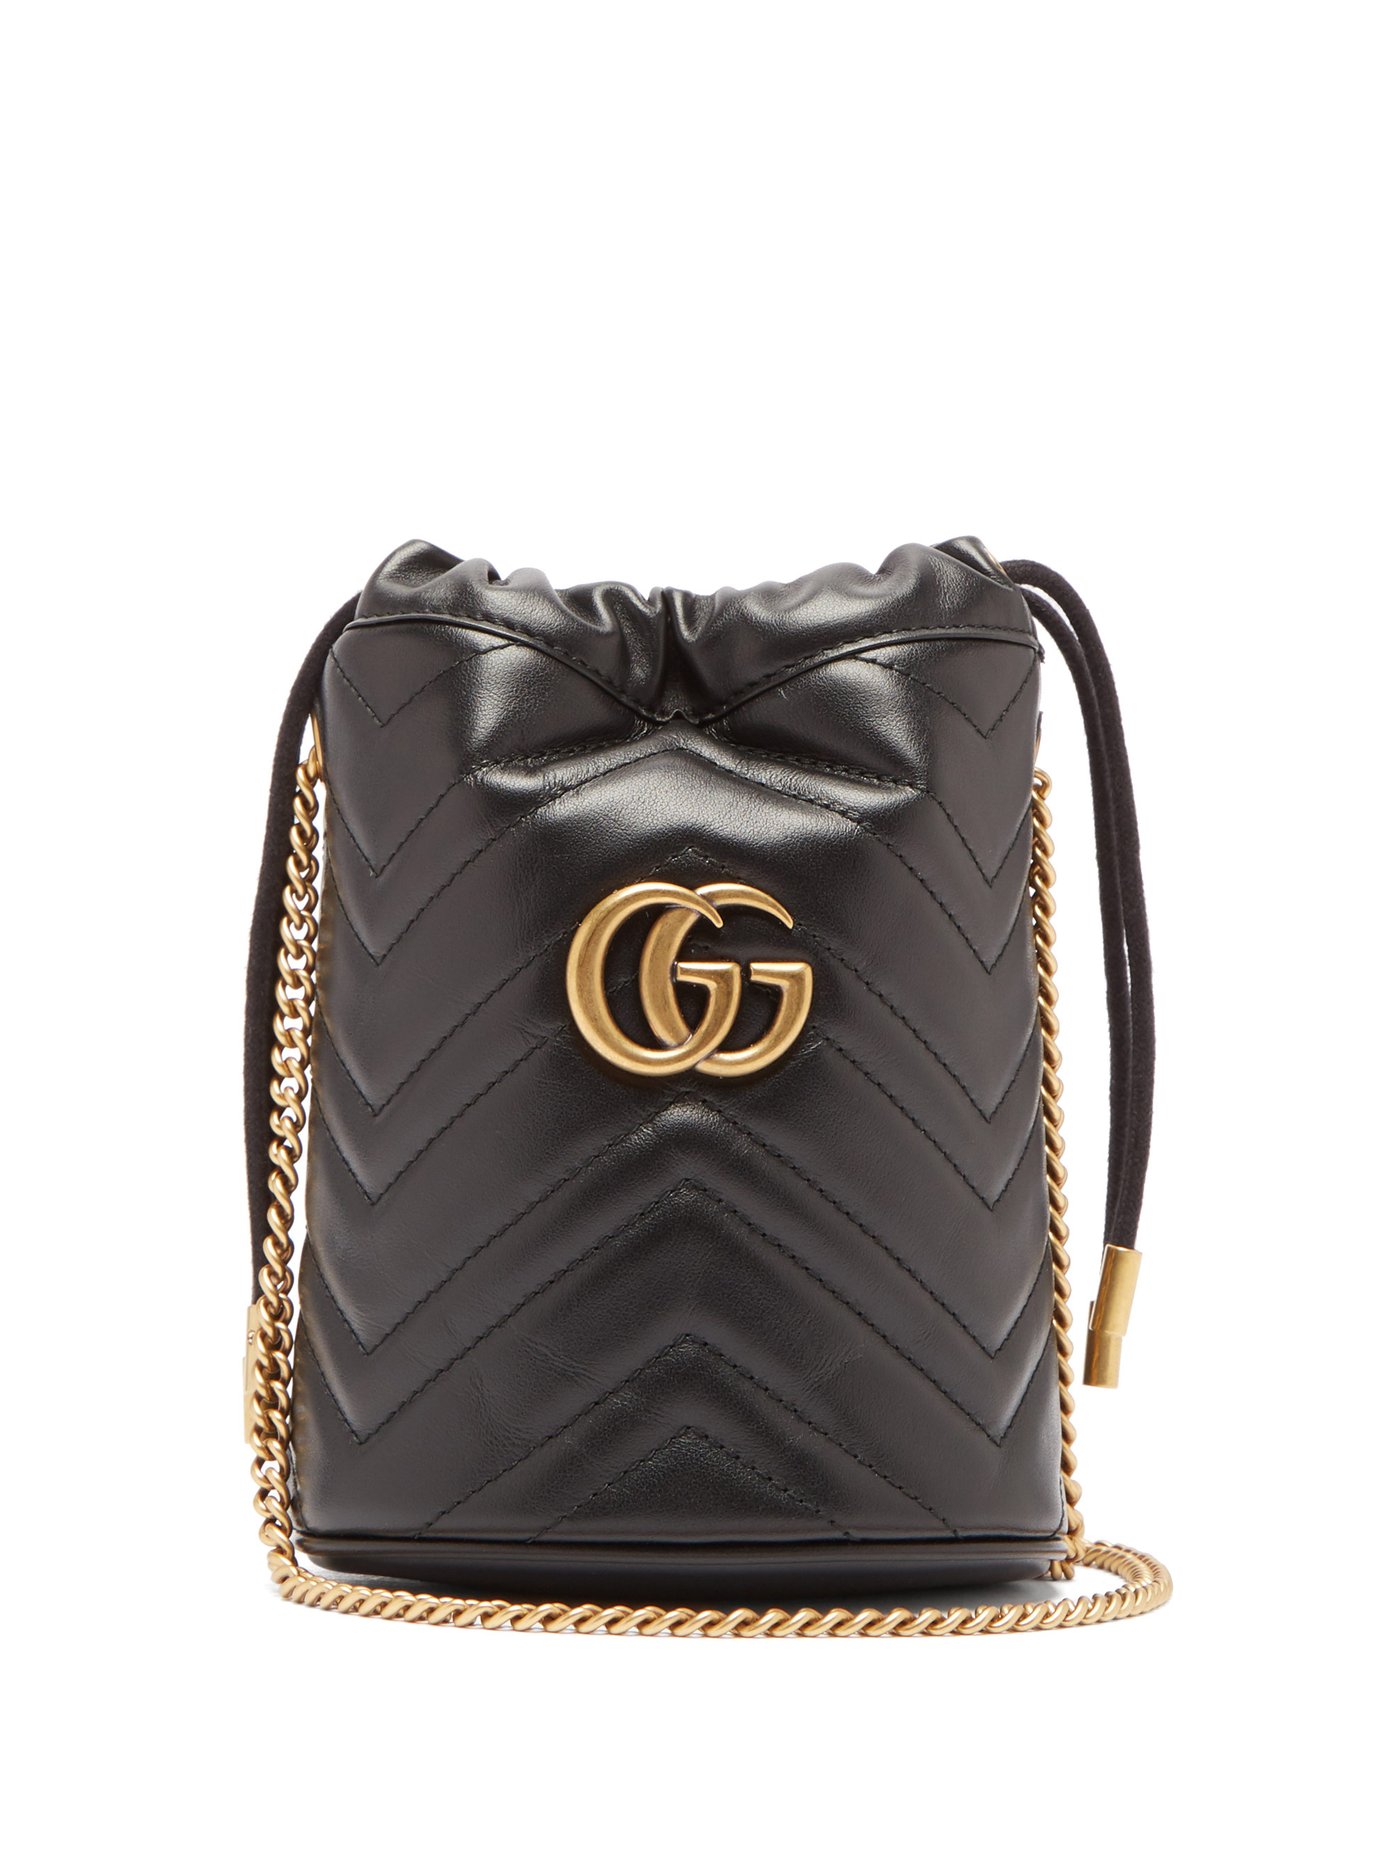 GG Marmont leather bucket bag | Gucci 